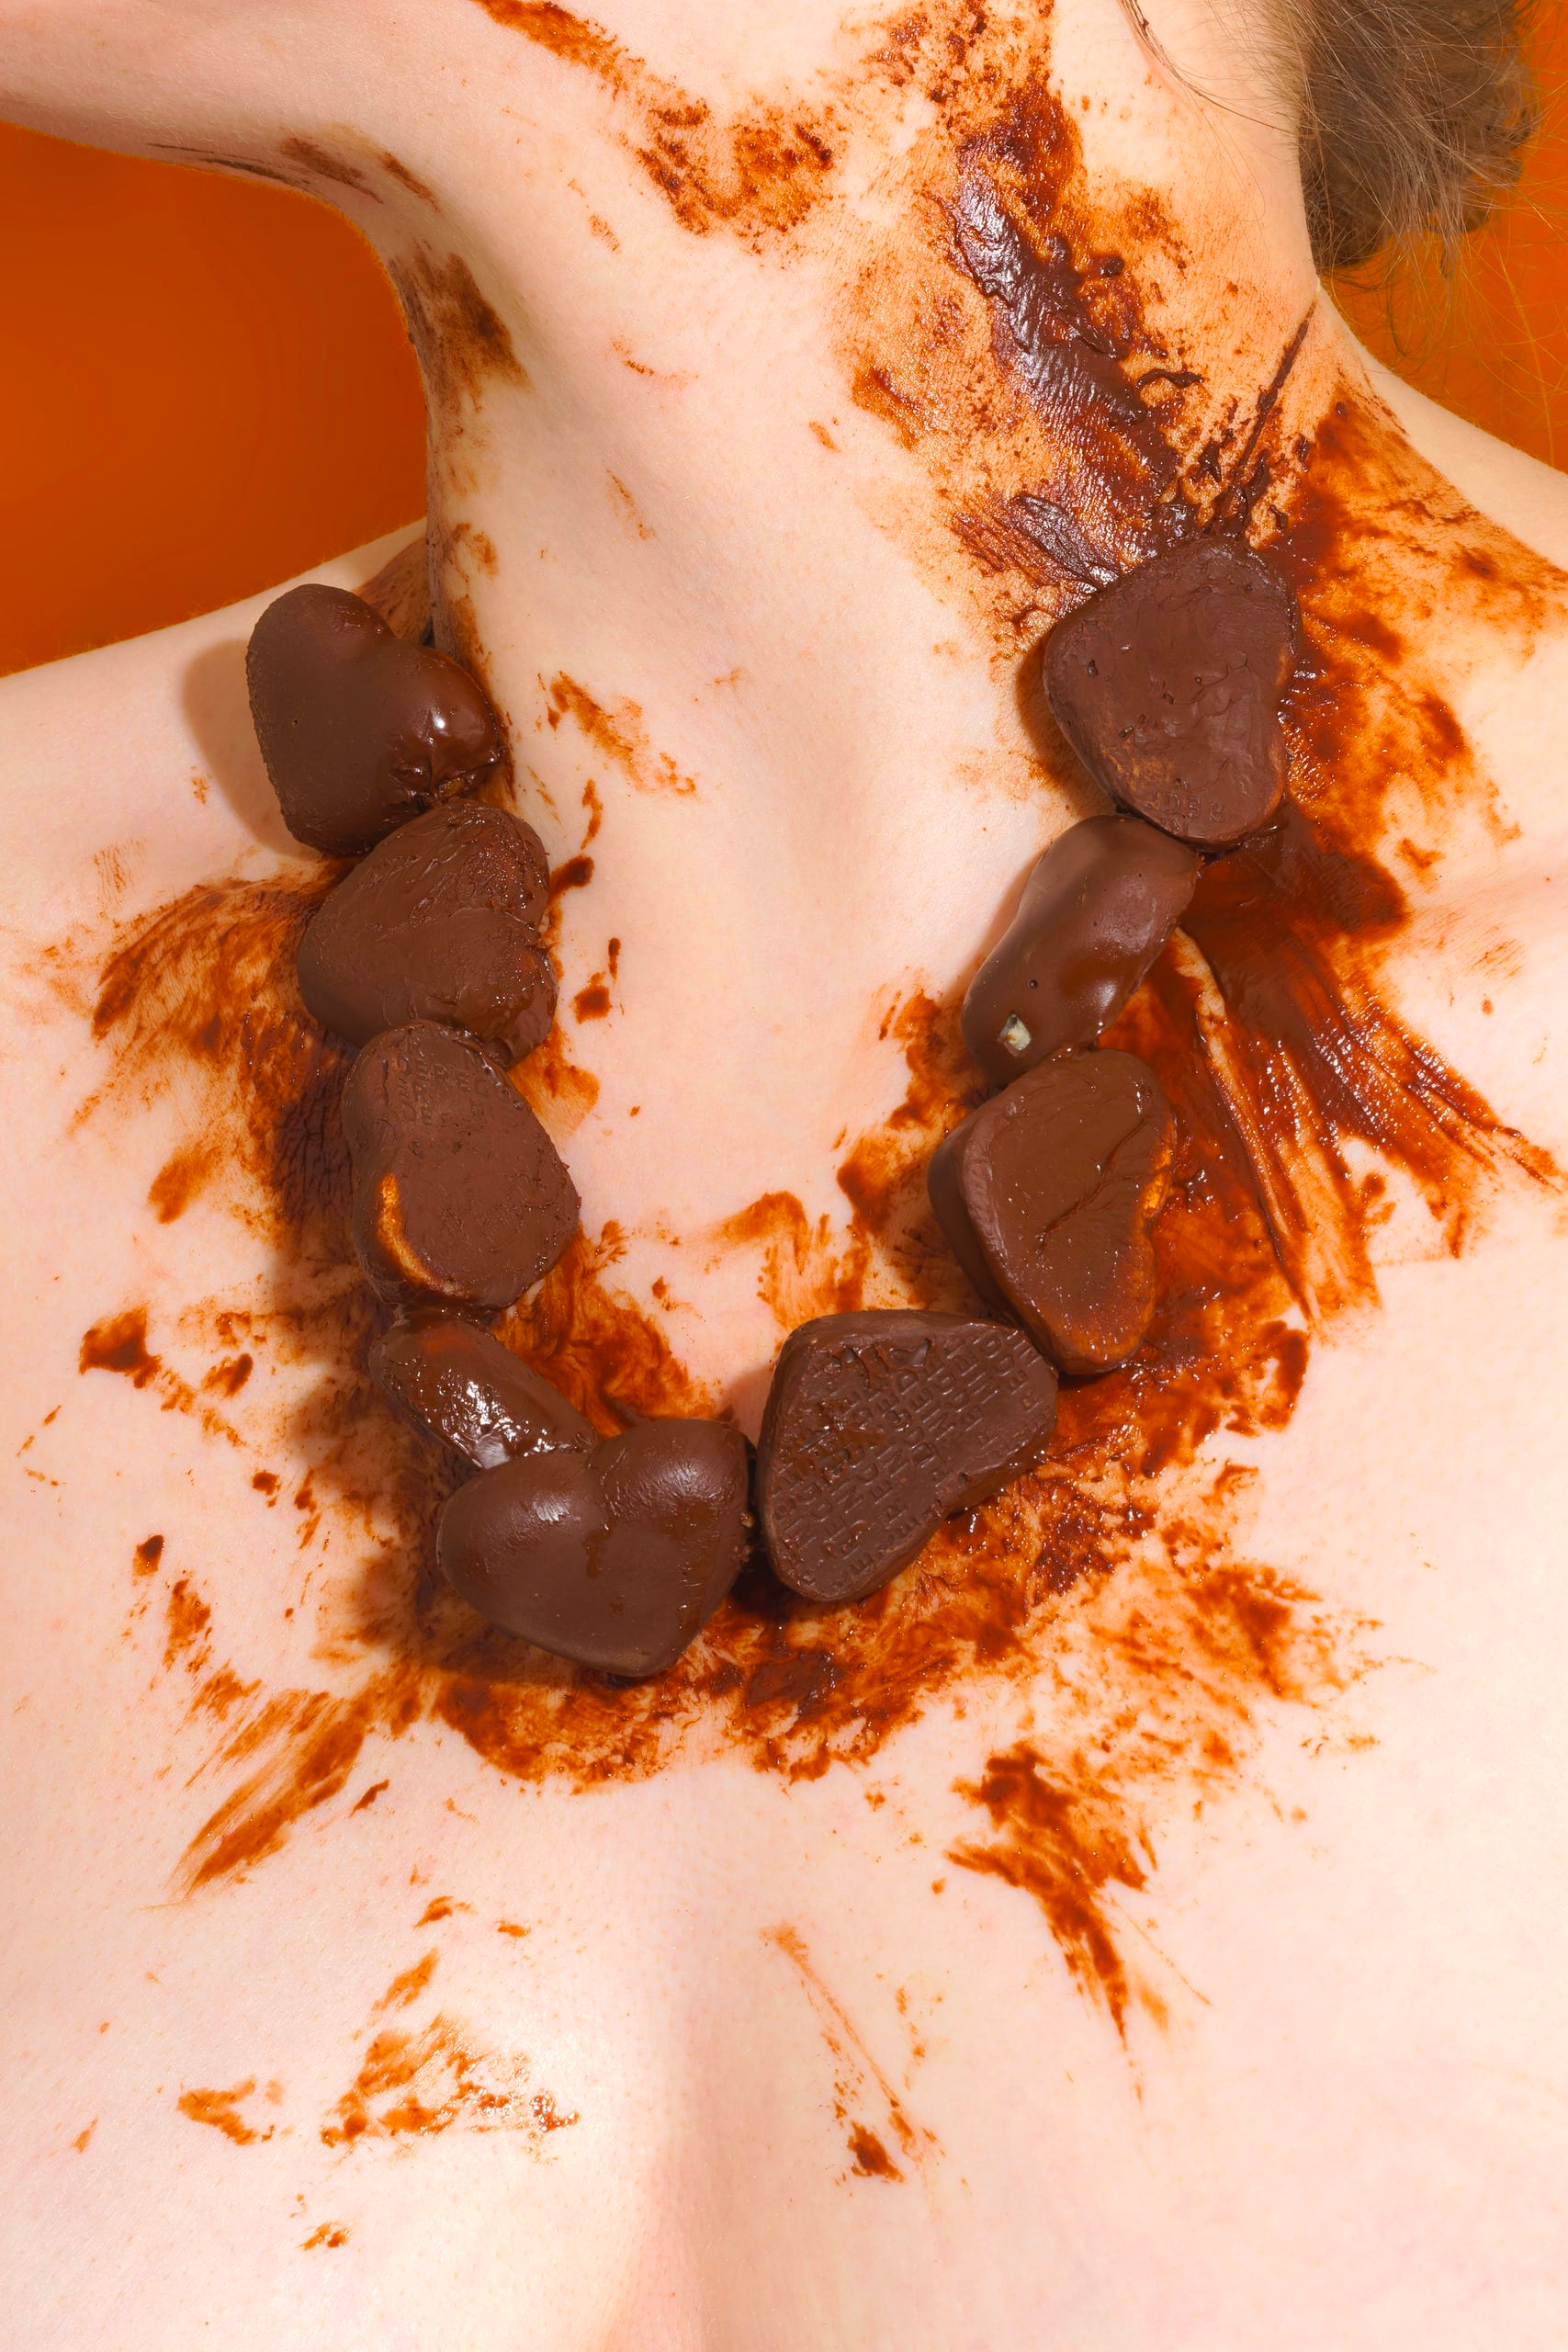 A close-up photograph of a bare neck, wearing a chain of melted chocolates.